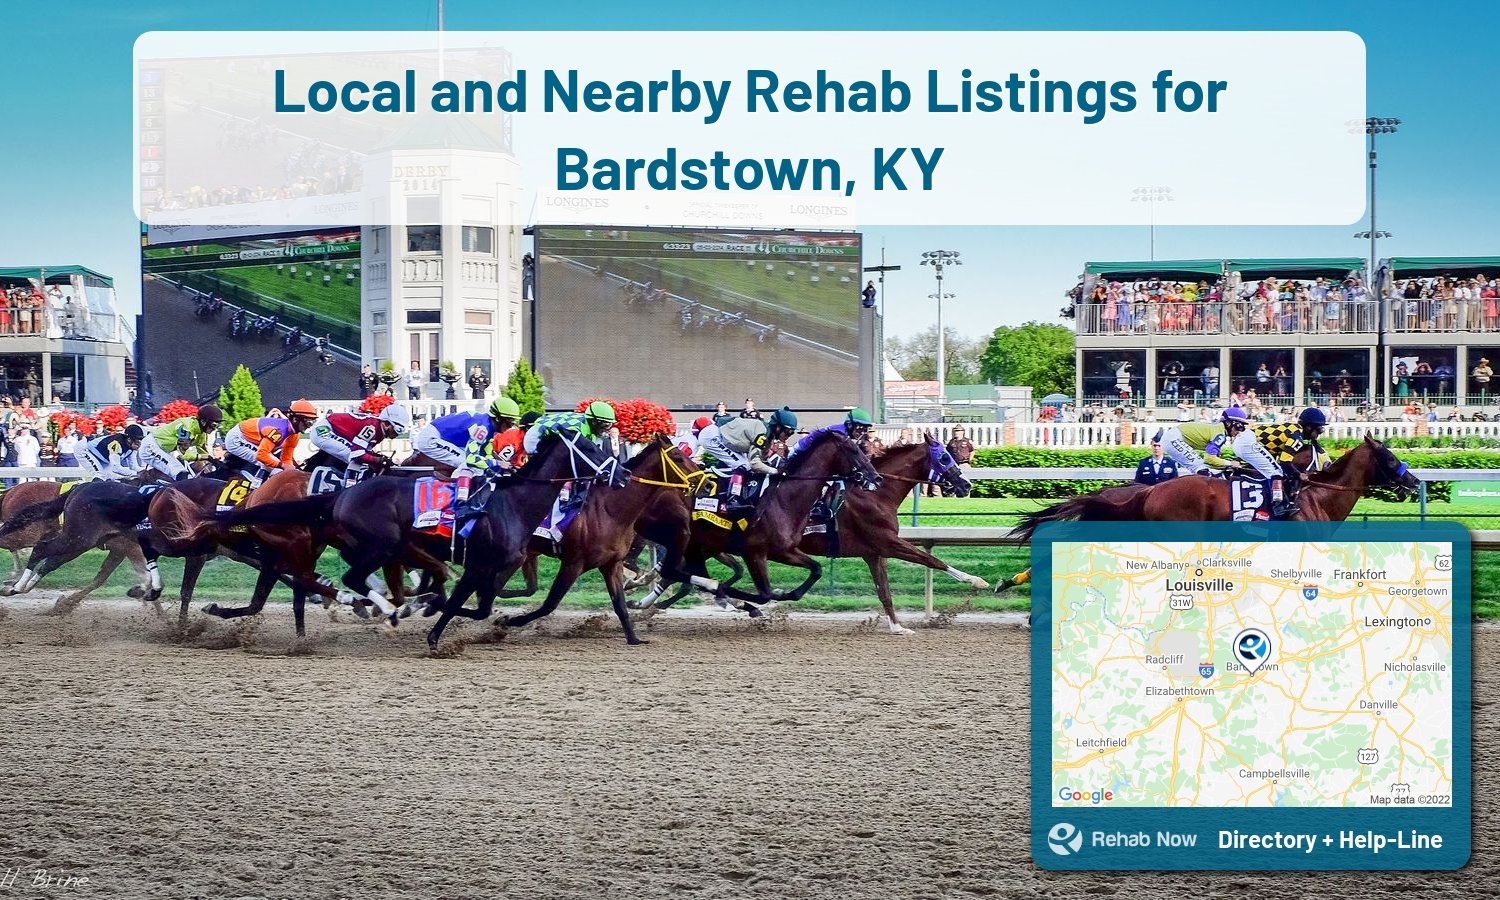 View options, availability, treatment methods, and more, for drug rehab and alcohol treatment in Bardstown, Kentucky